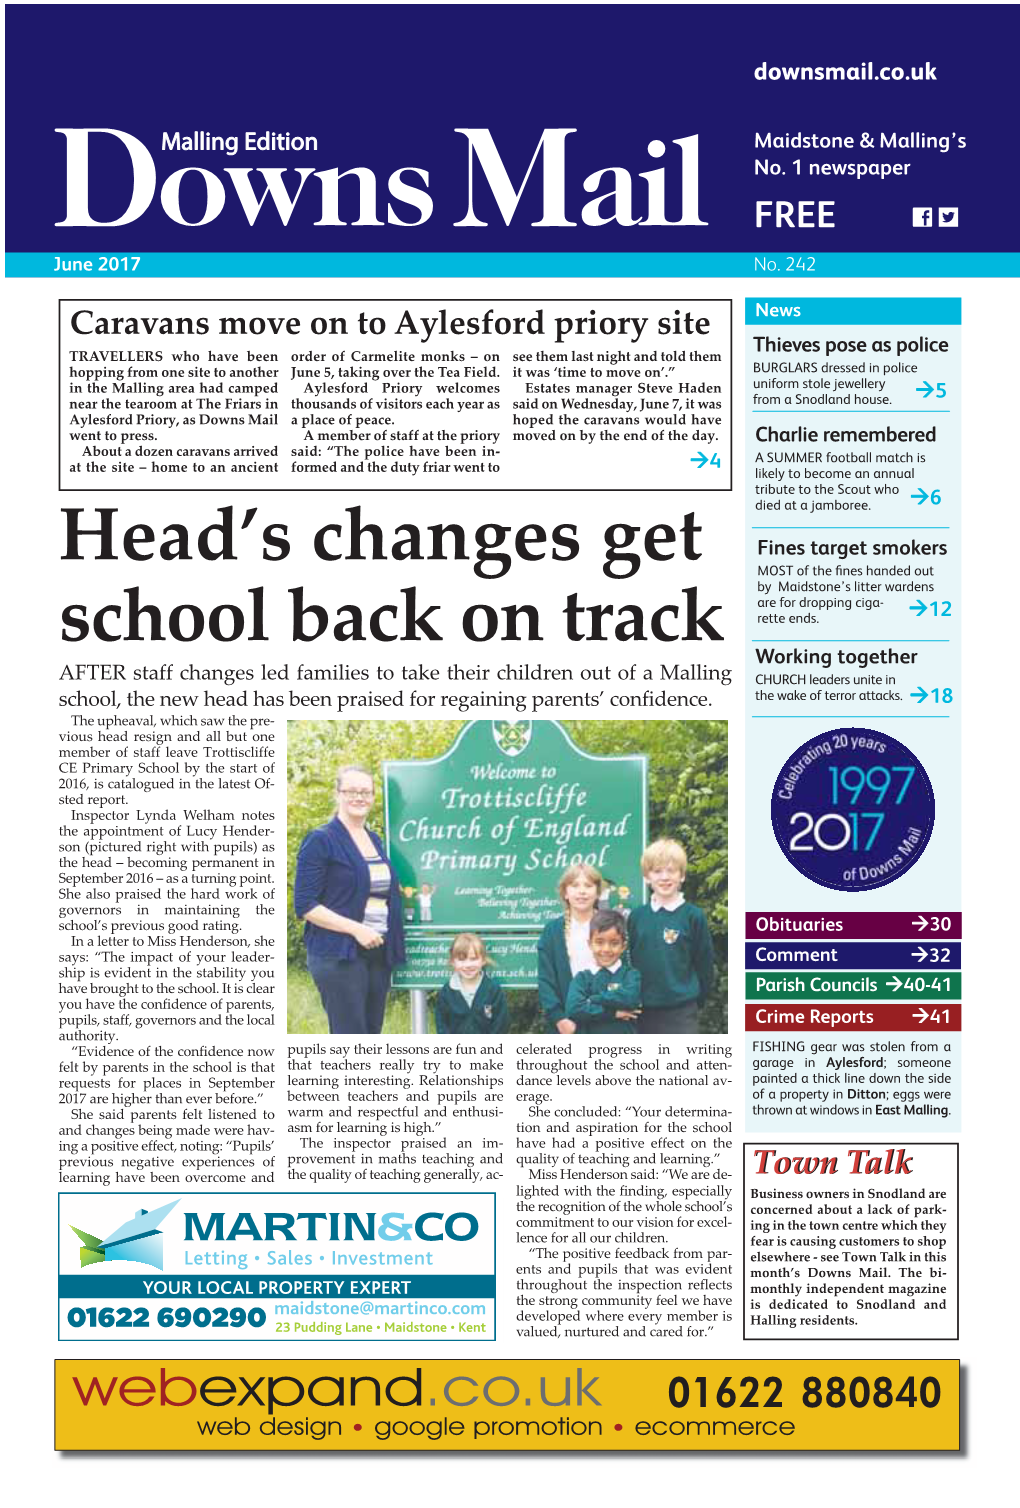 Head's Changes Get School Back on Track